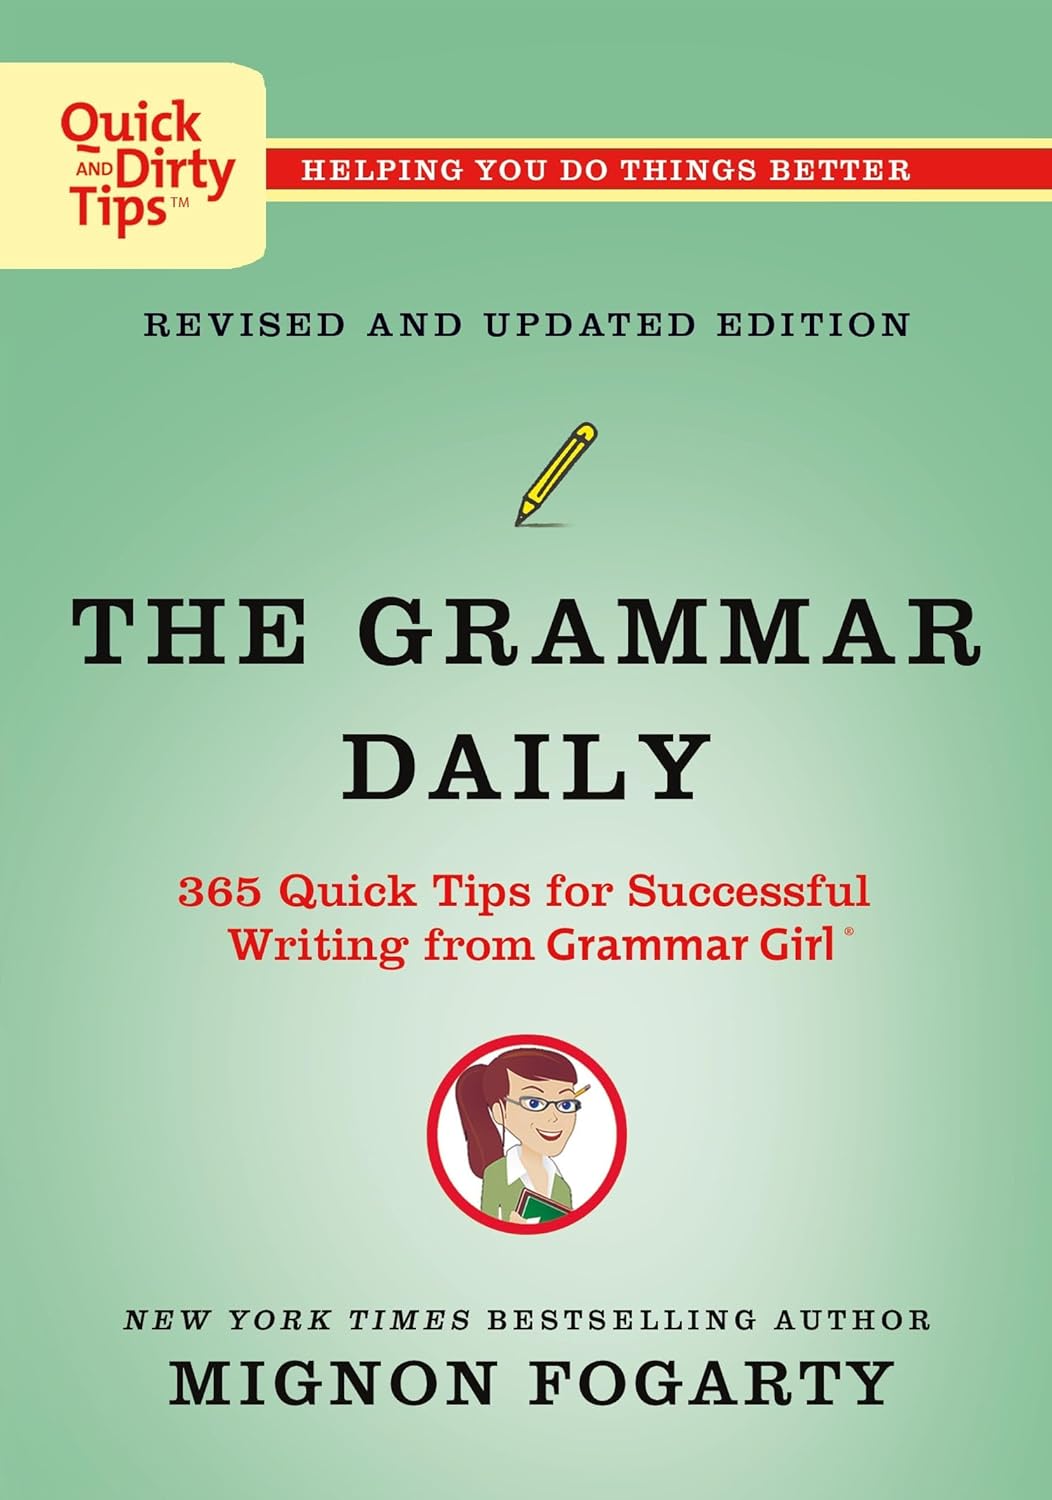 The Grammar Daily 365 Quick Tips for Successful Writing from Grammar Girl (Revised) (Quick & Dirty Tips) - SureShot Books Publishing LLC